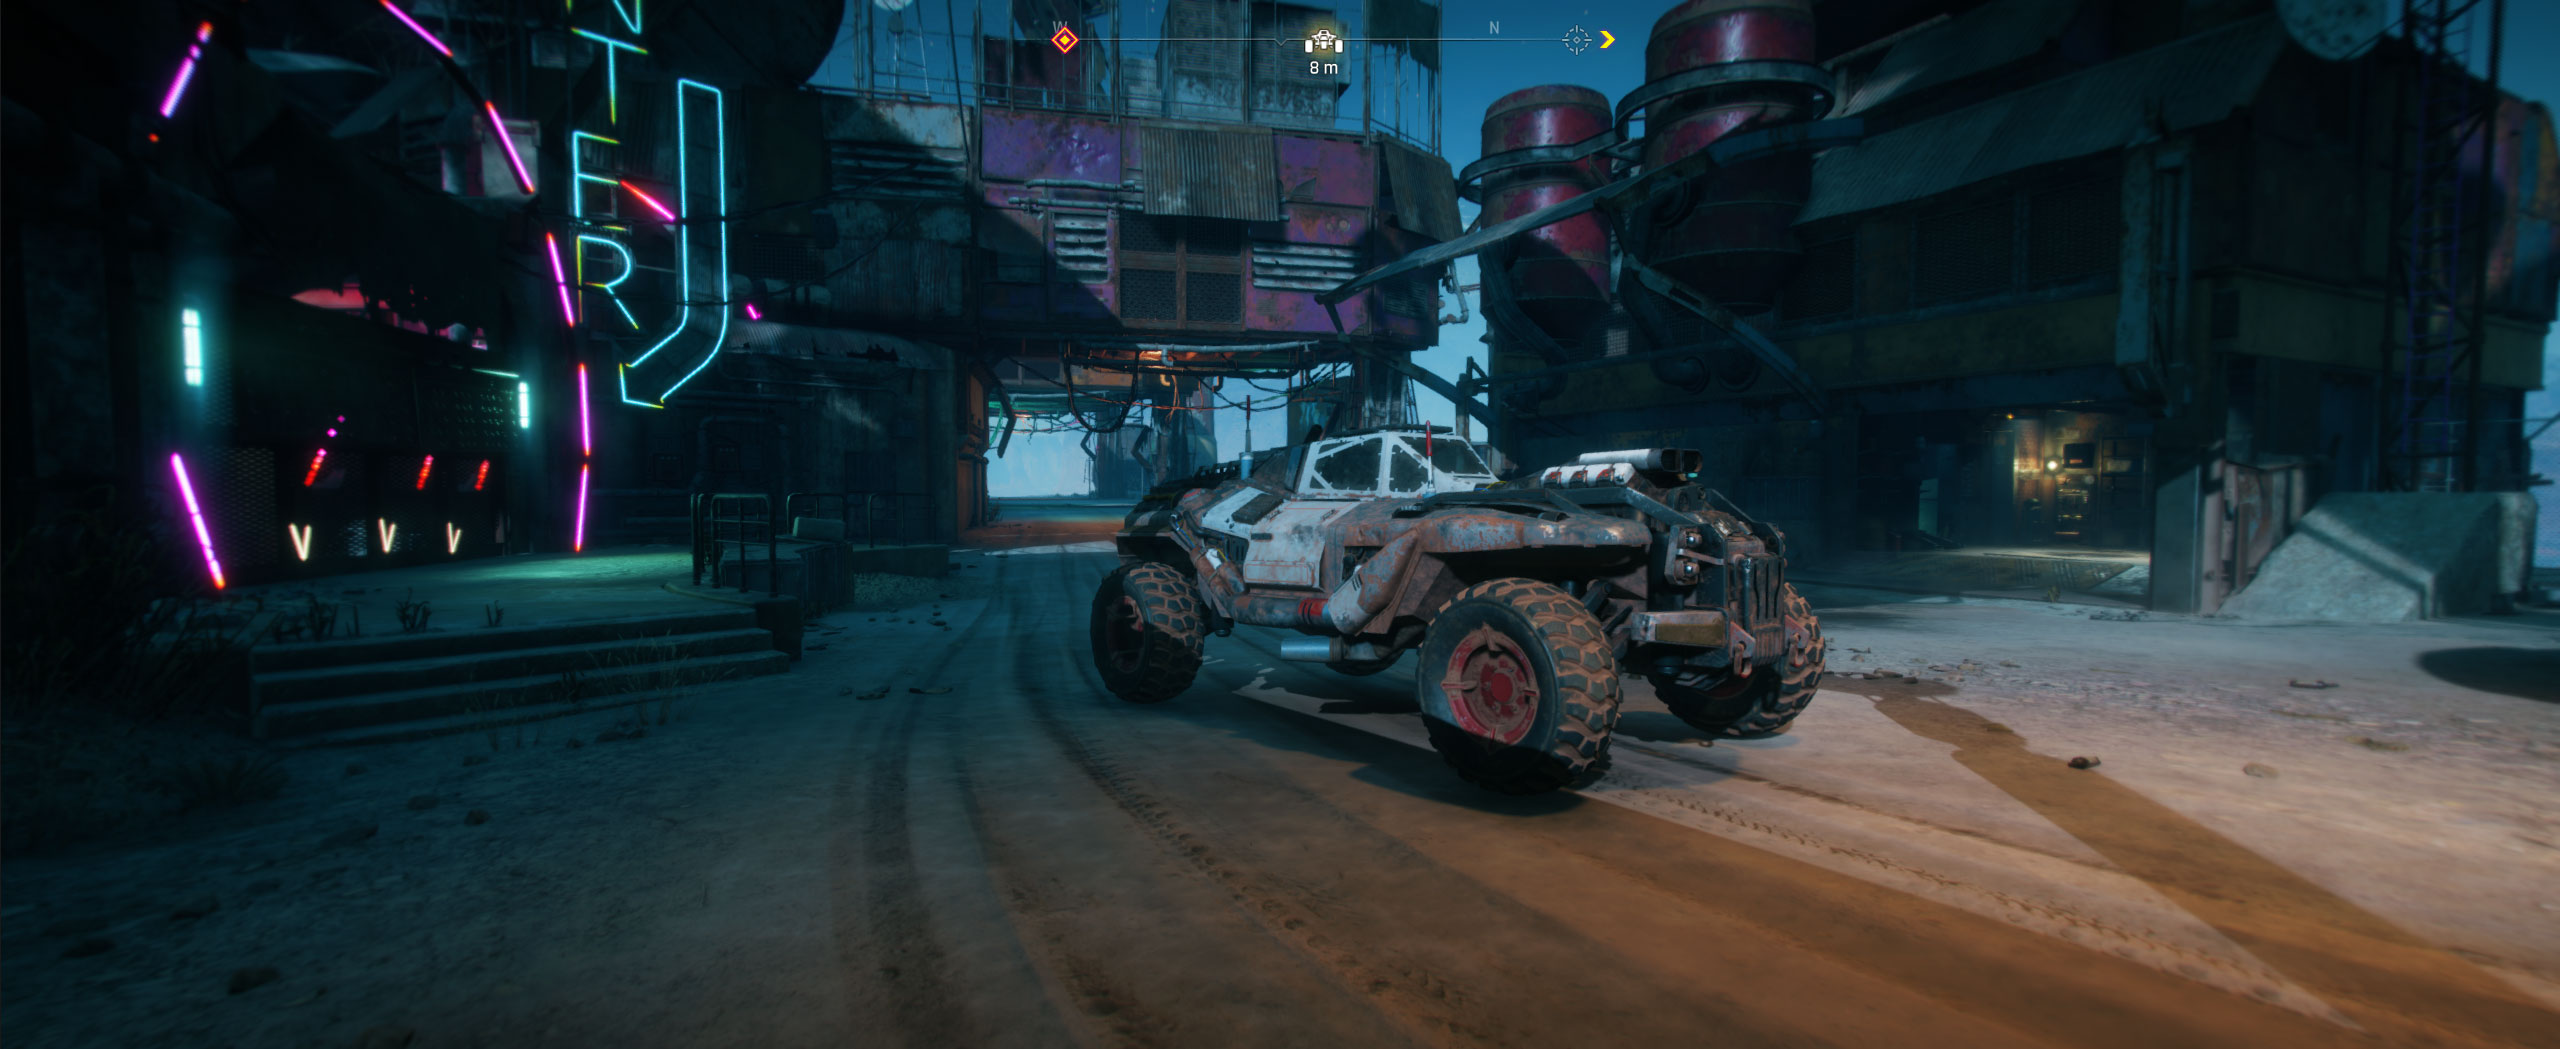 Rage 2 system requirements, benchmarks 